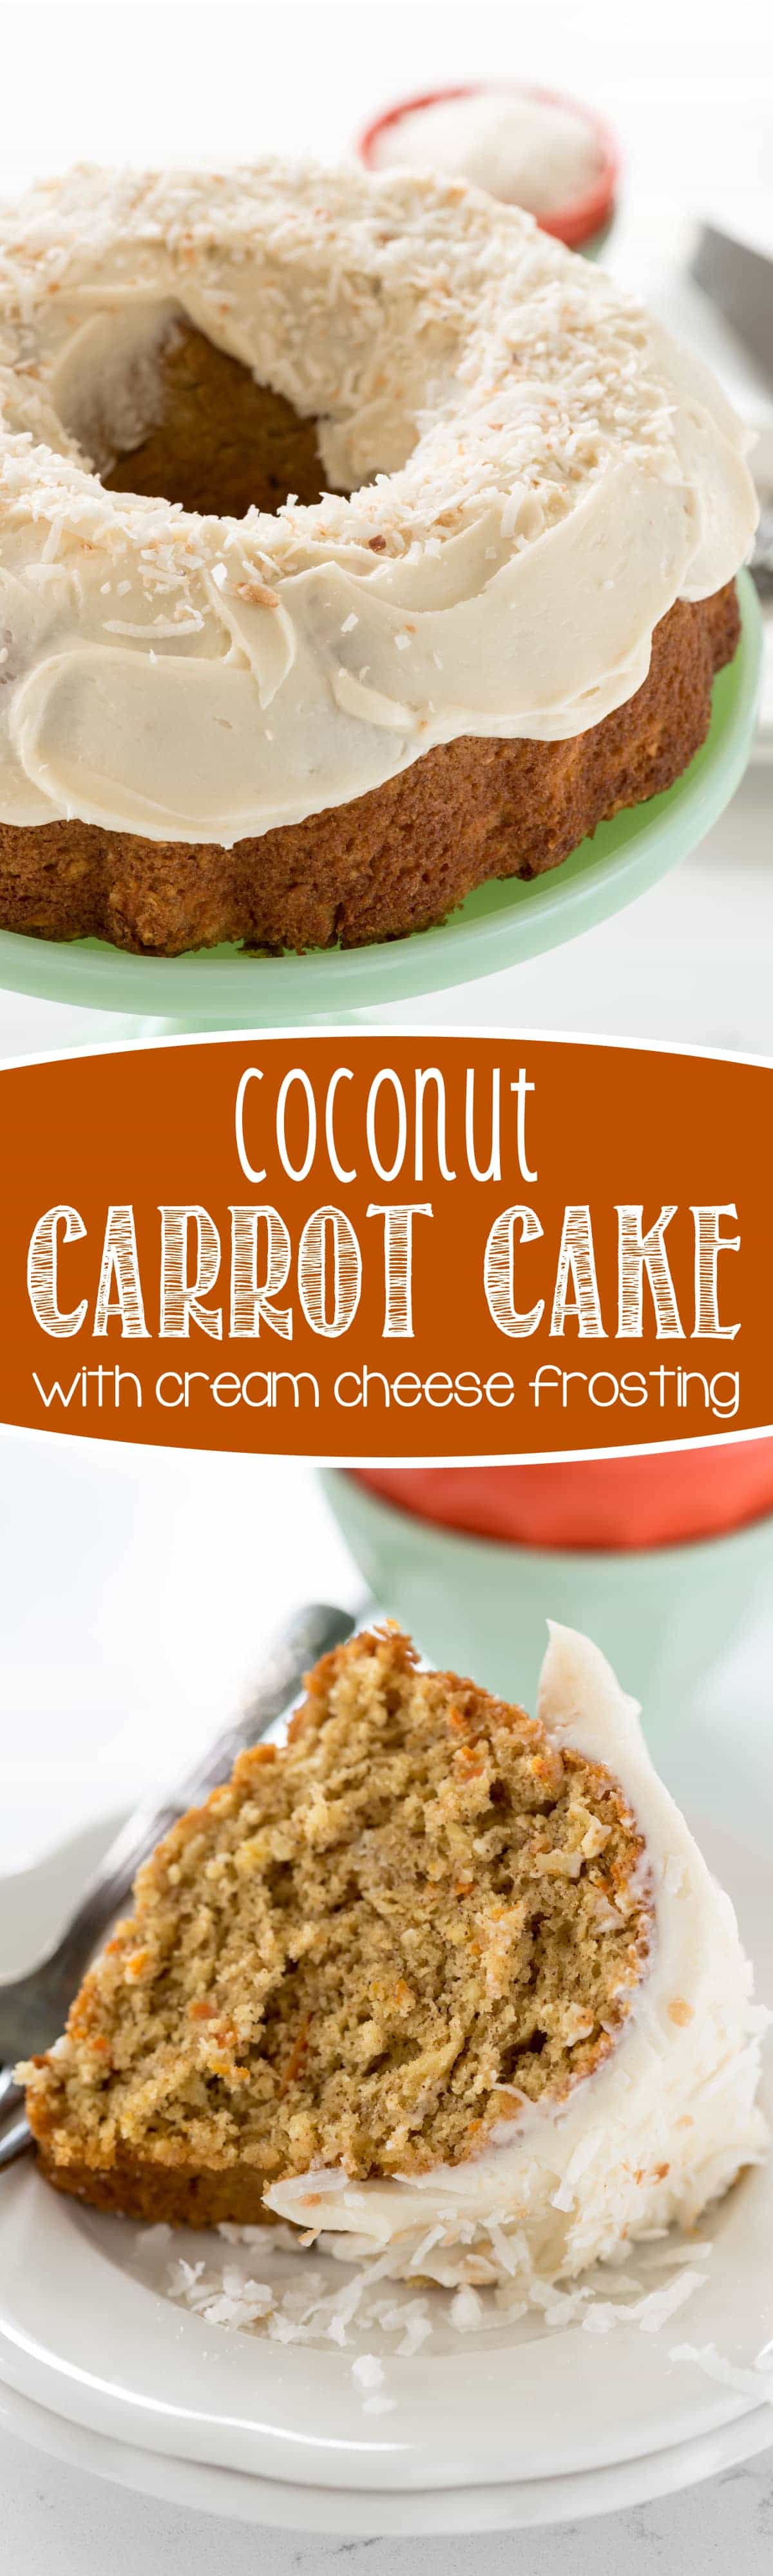 Coconut Carrot Cake - this easy carrot cake recipe is full of coconut flavor with a cream cheese frosting. My family loved this cake!